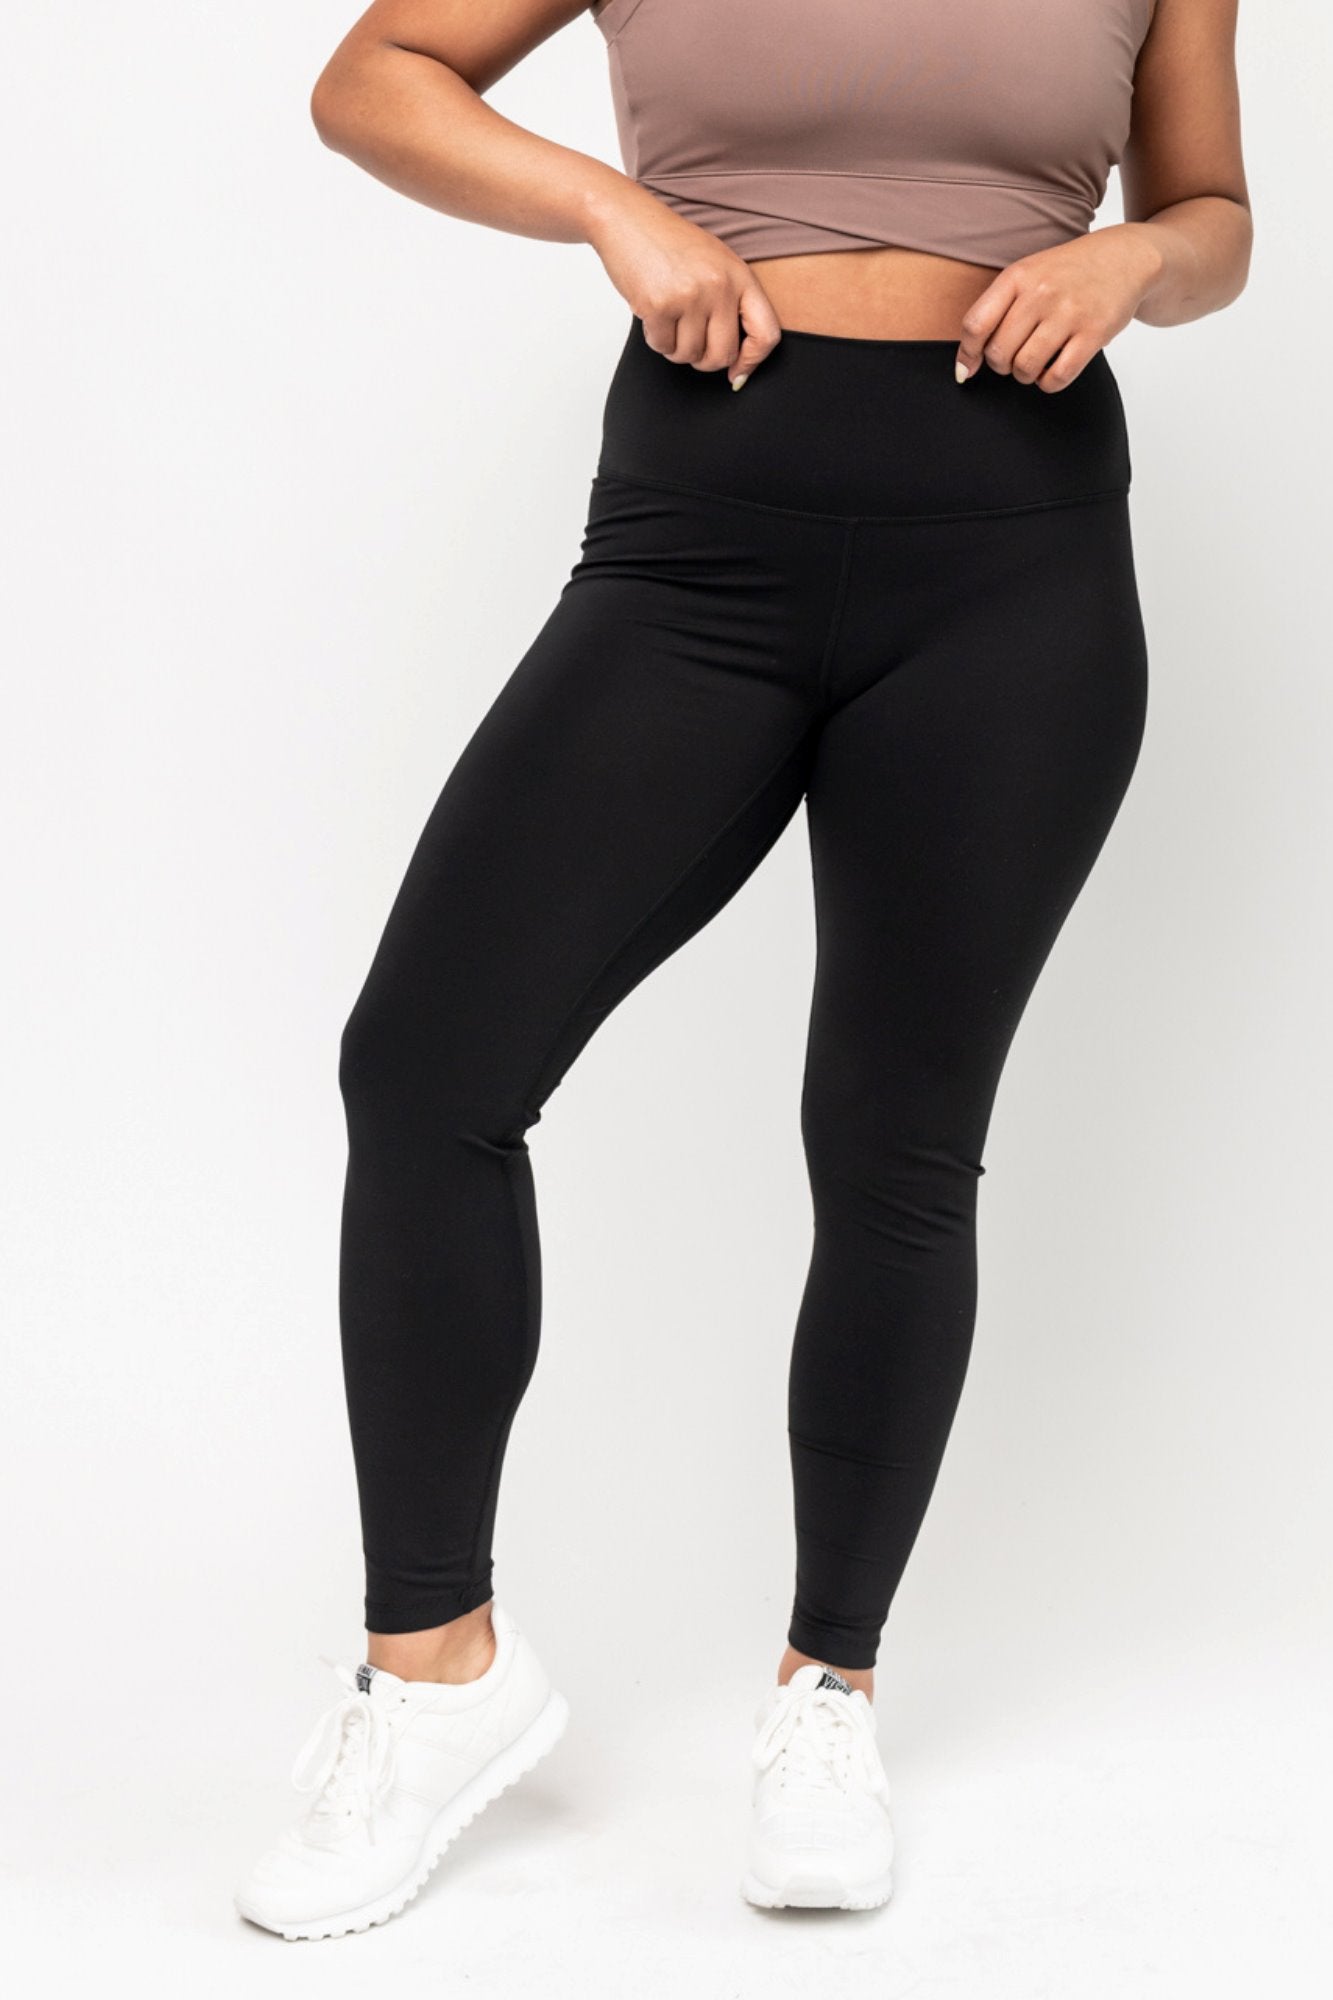 Buy Comfort Lady Women's Slim Fit Leggings (Pack of 2)(Lng-001_Black &  White_Free Size) at